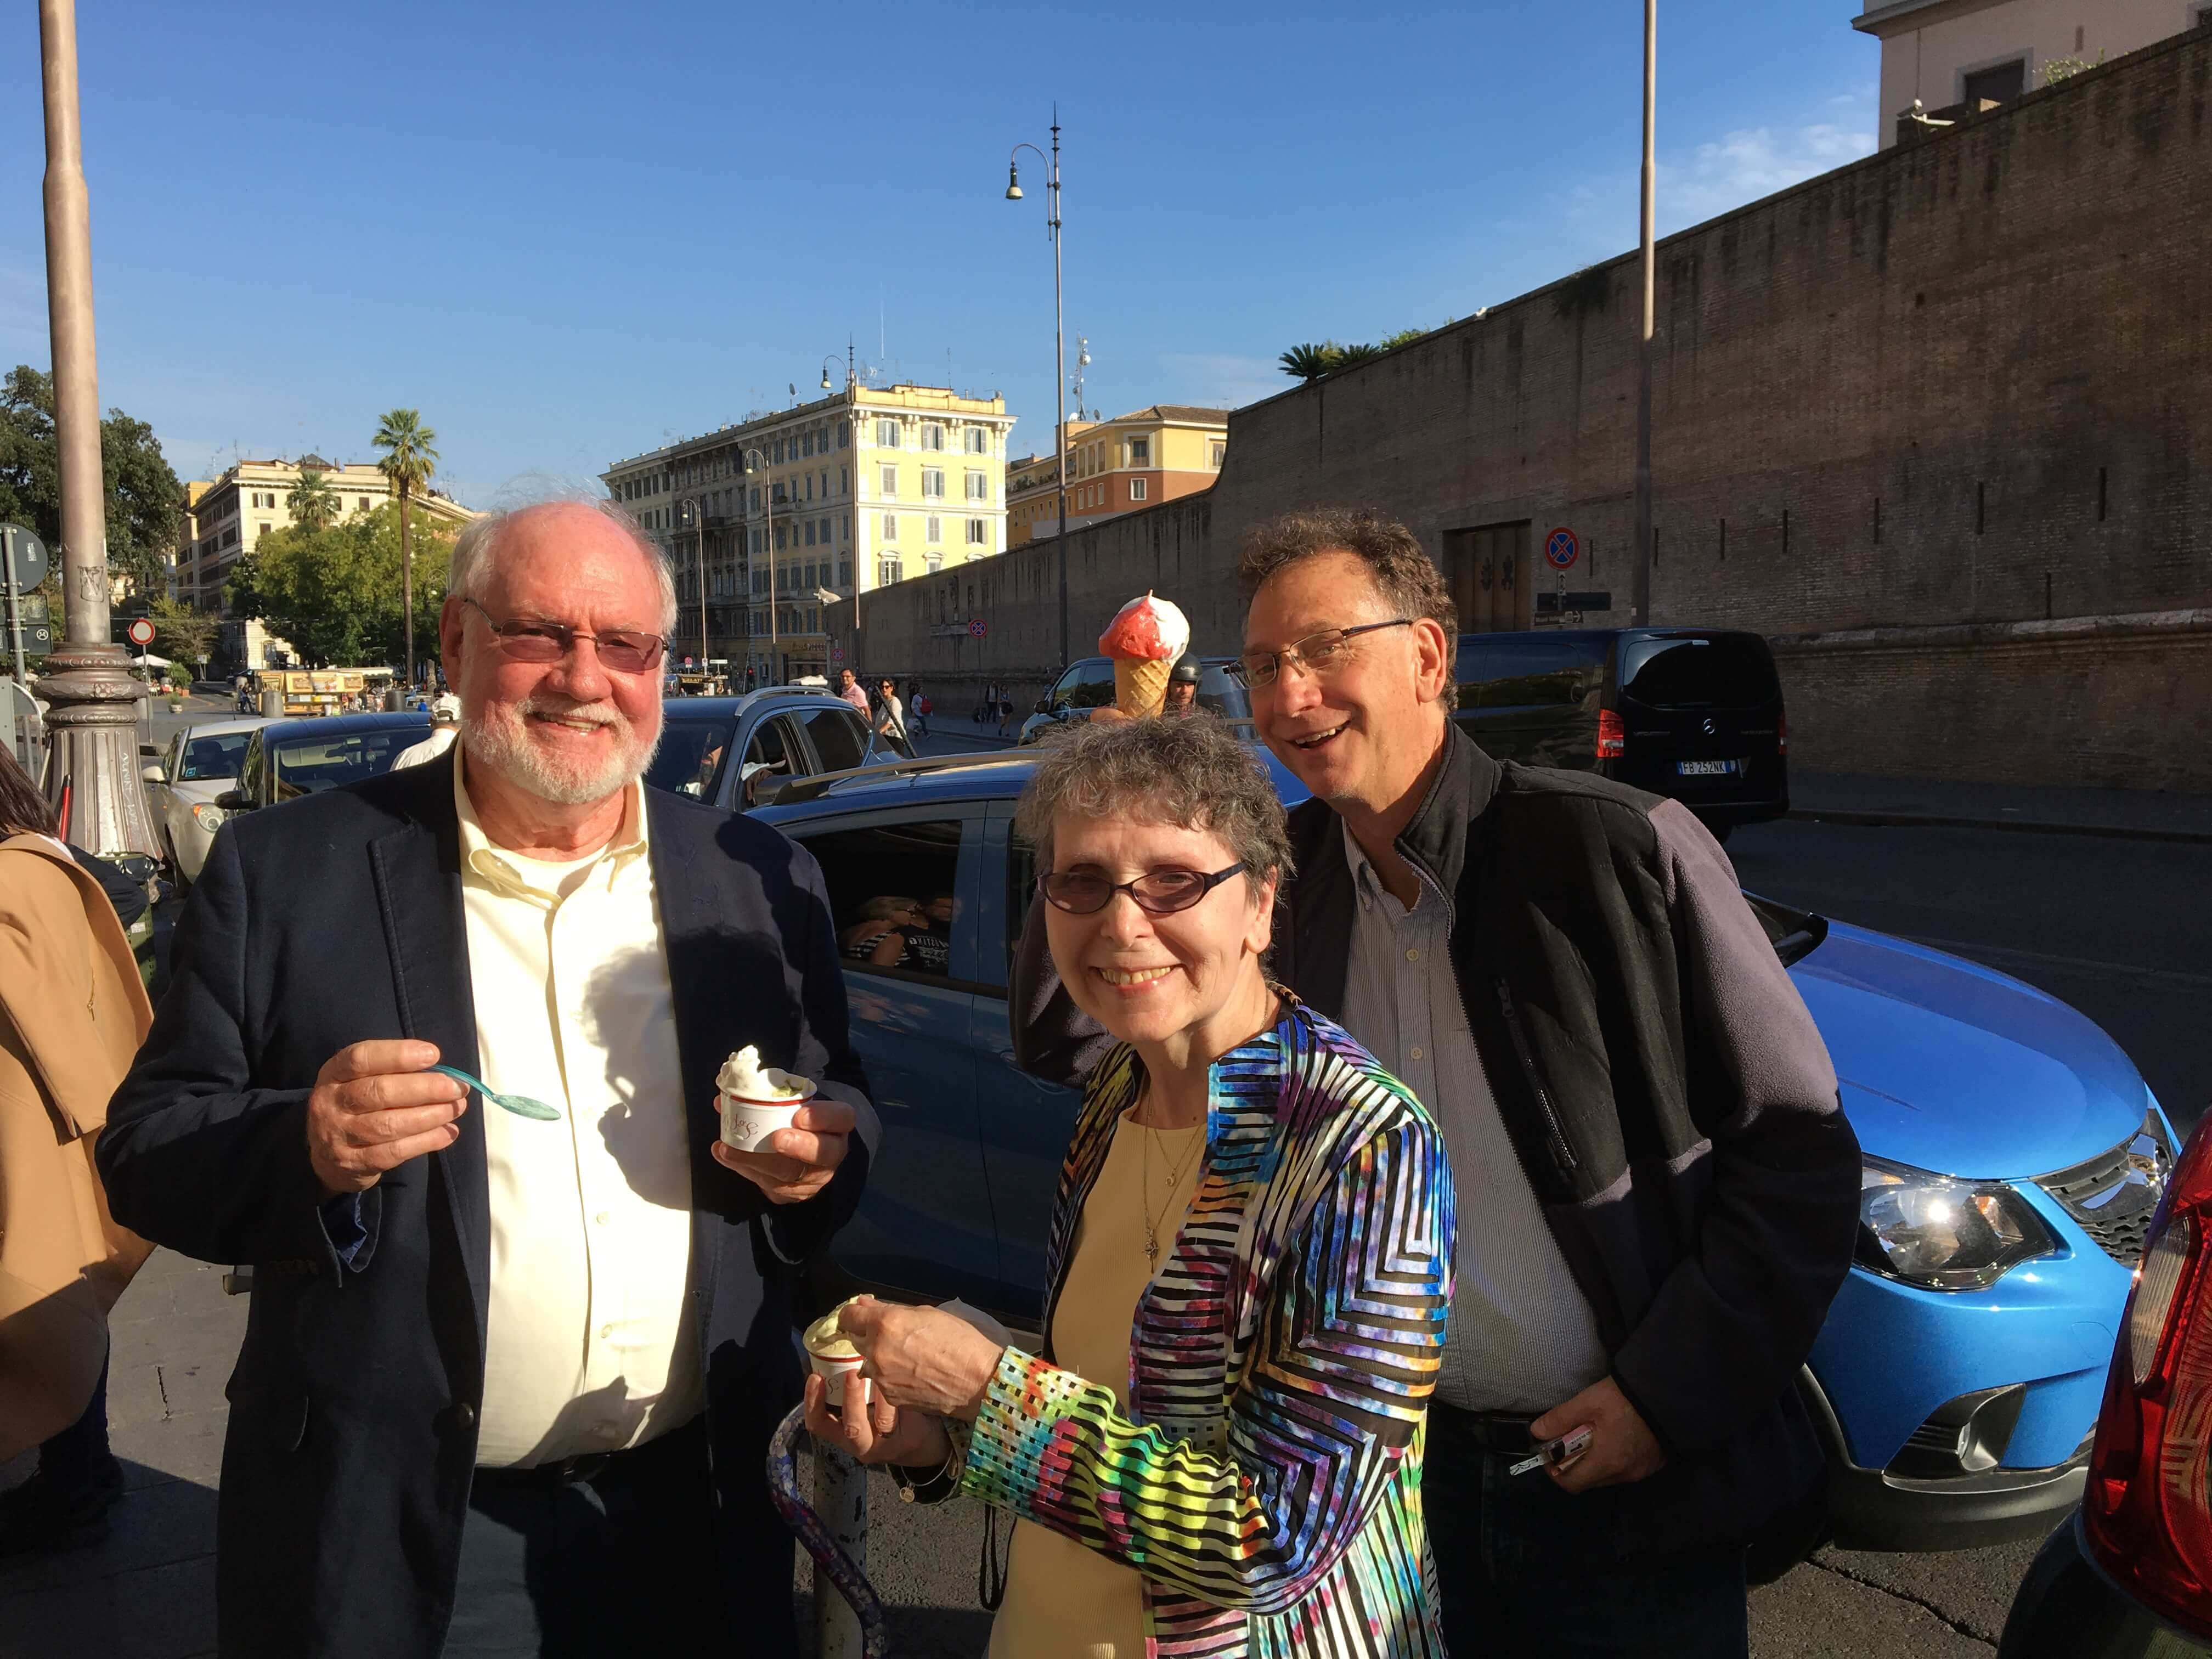 smiling after getting ice cream in italy